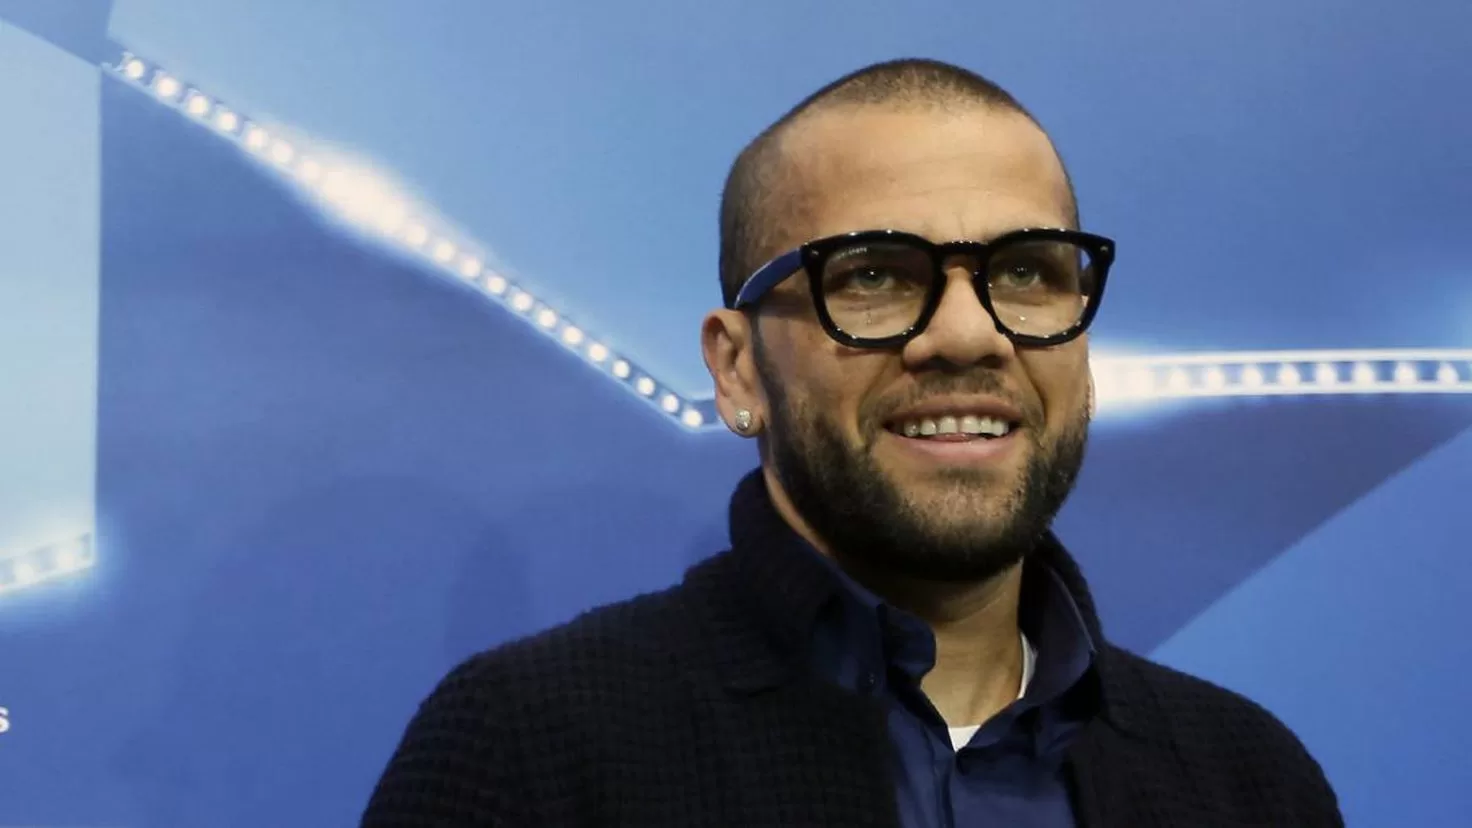 Dani Alves is prosecuted for the alleged rape at the 'Sutton' nightclub
